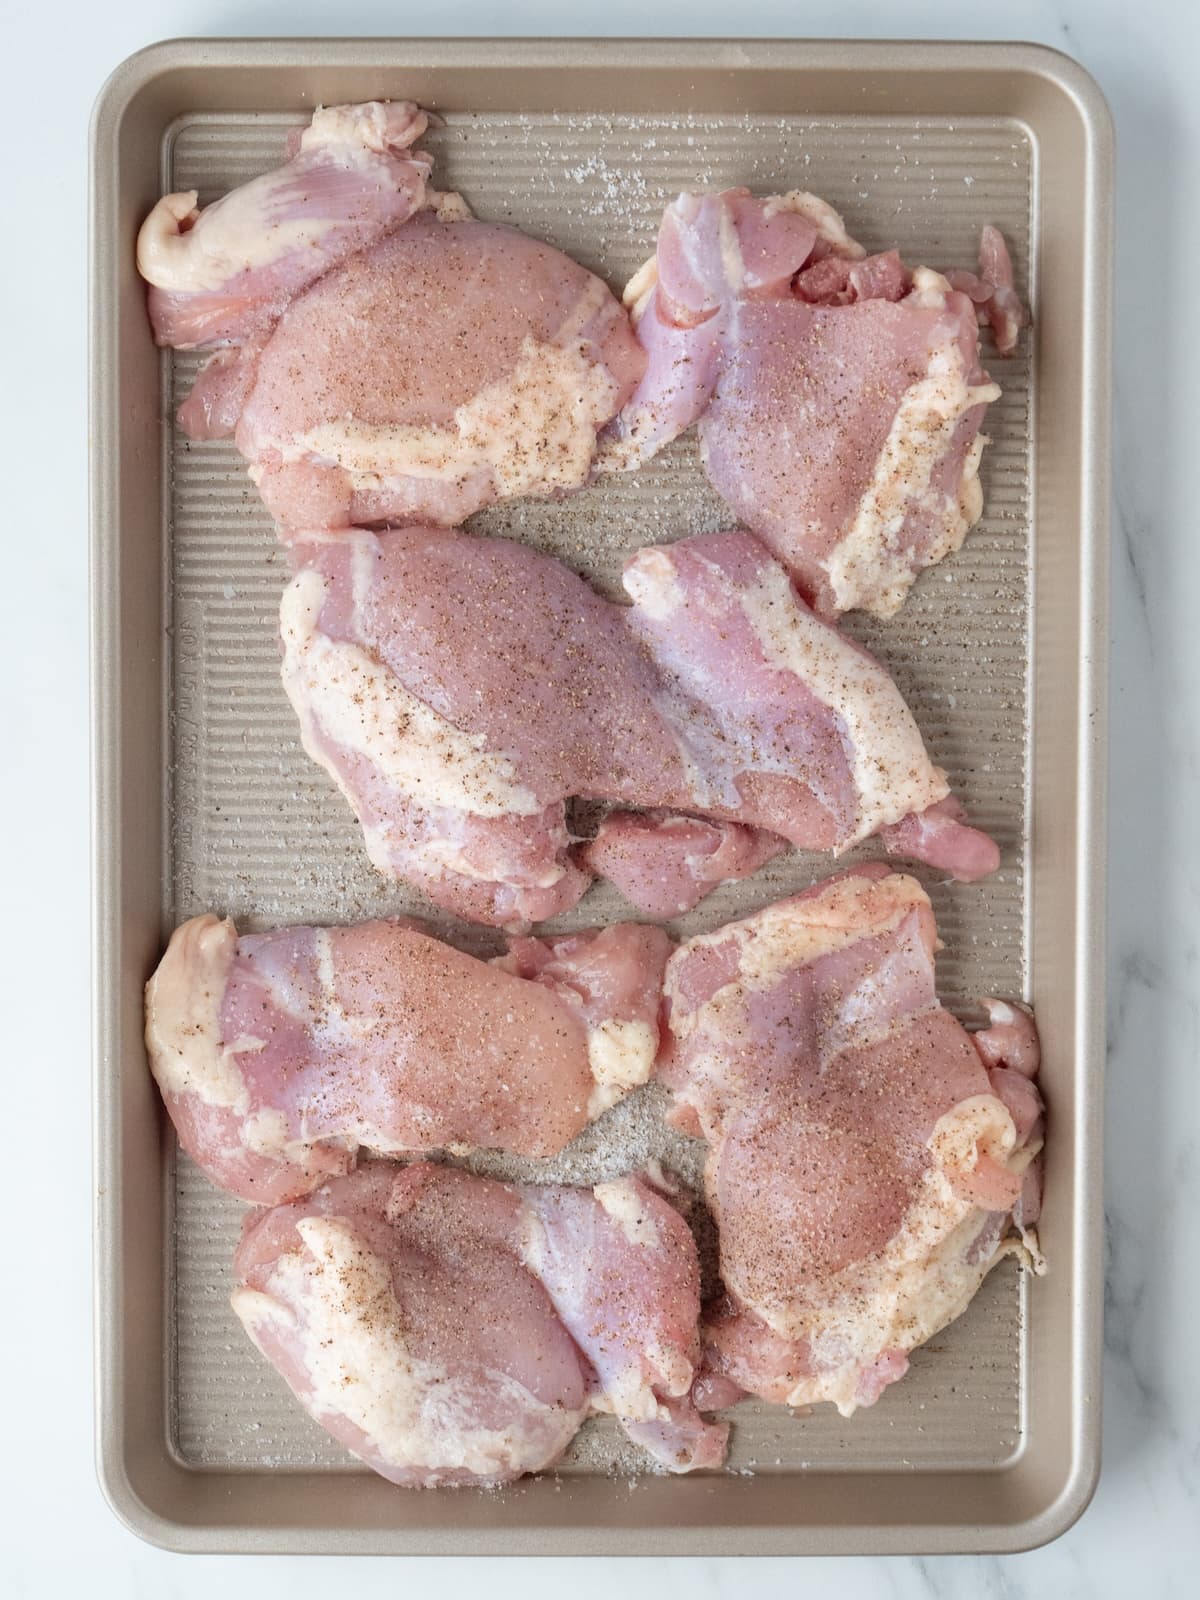 A baking sheet with chicken thighs seasoned with salt and pepper.